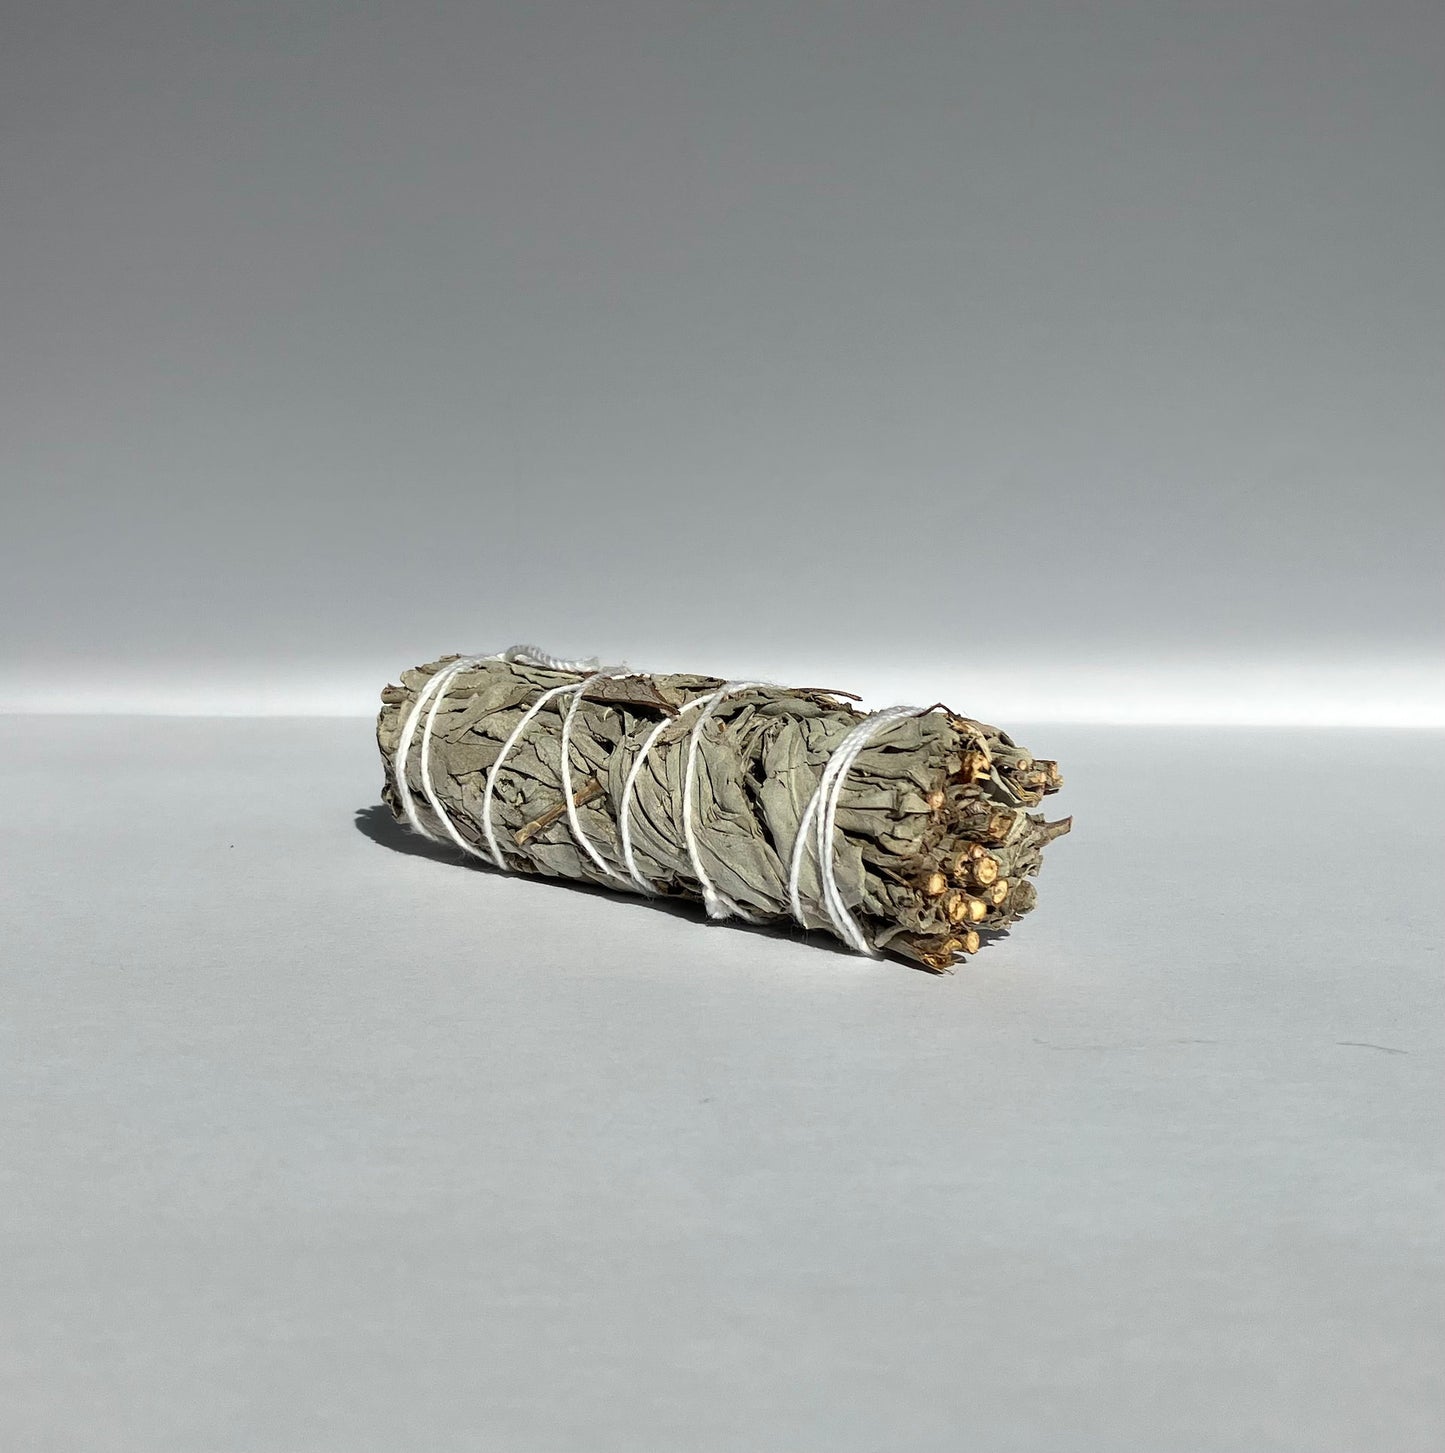 Ancient Cleanse - White Sage Smudge